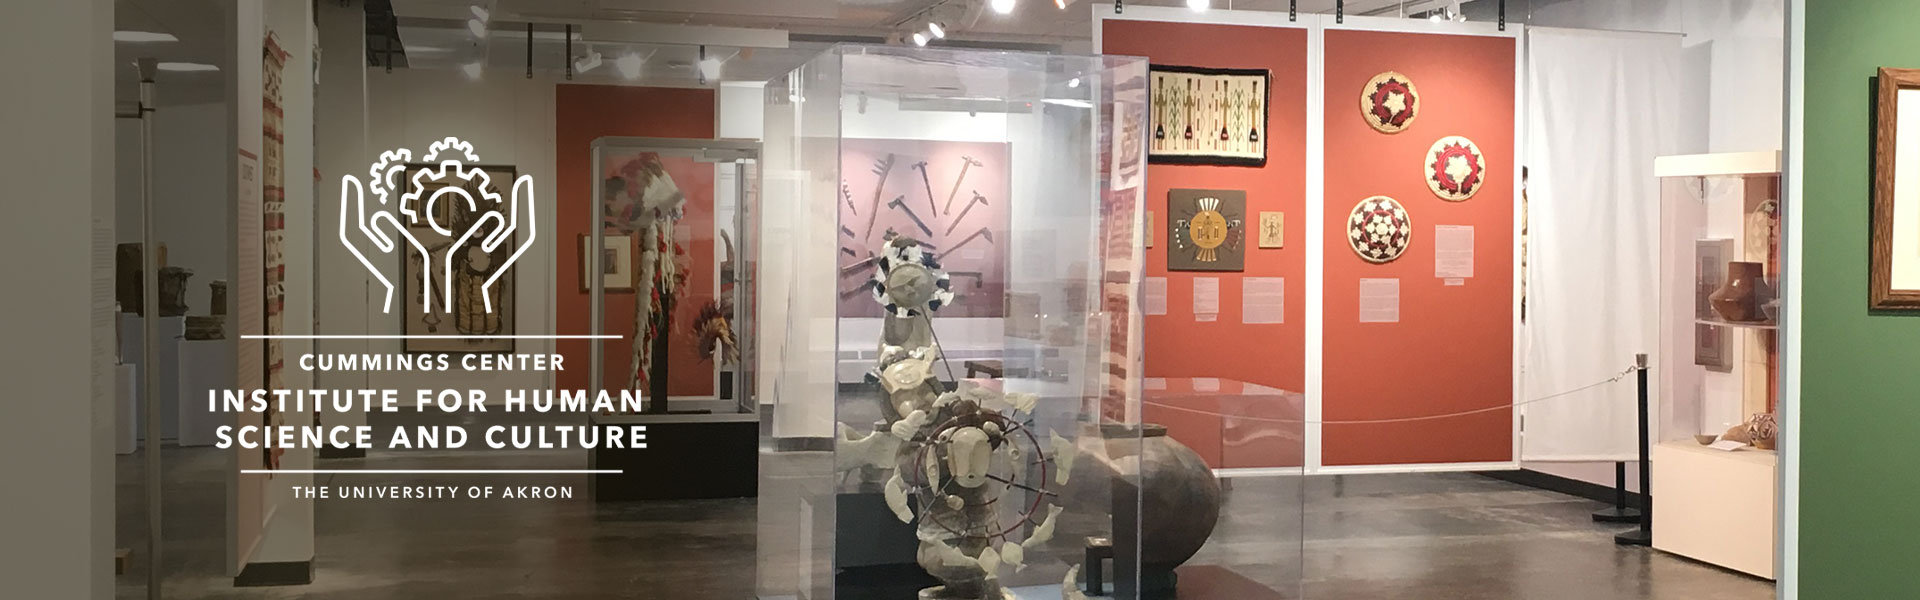 Institute for Human Science and Culture logo displayed over a gallery of Native American artifacts